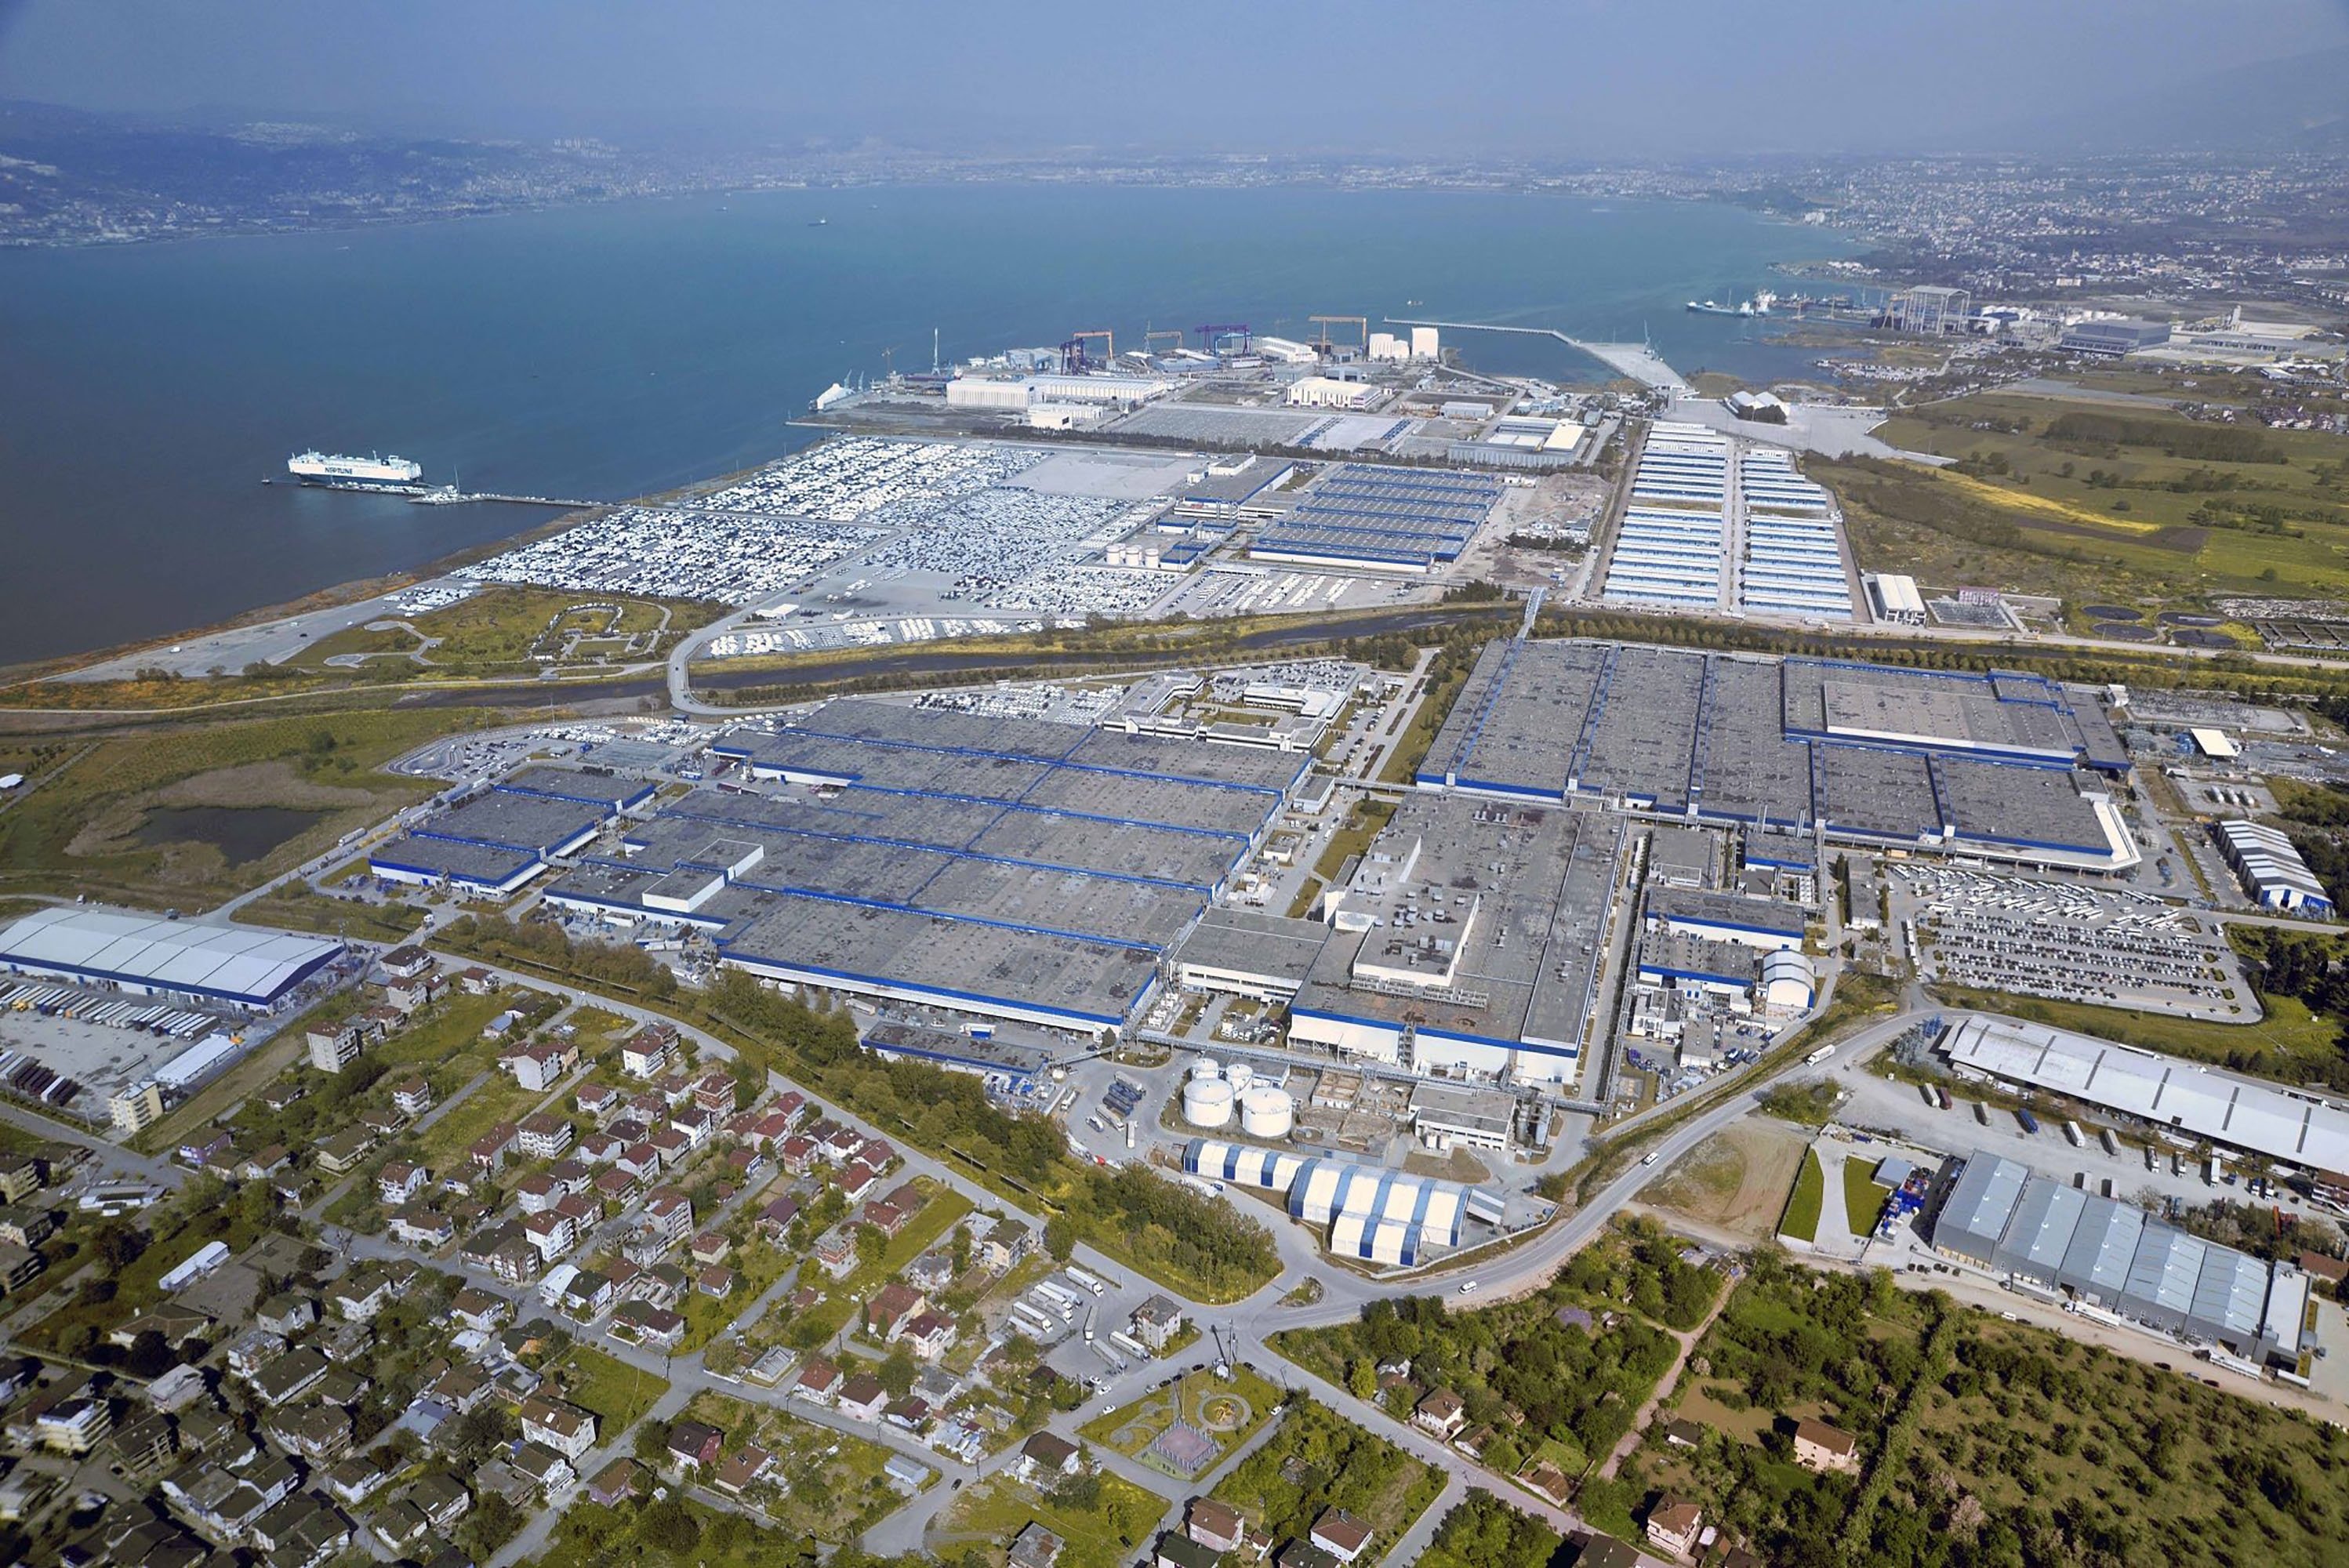 The Ford Otosan plant in Gölcük, Kocaeli, northwestern Turkey is seen in this aerial photo dated Dec. 5, 2020. (Photo courtesy of Ford Otosan)